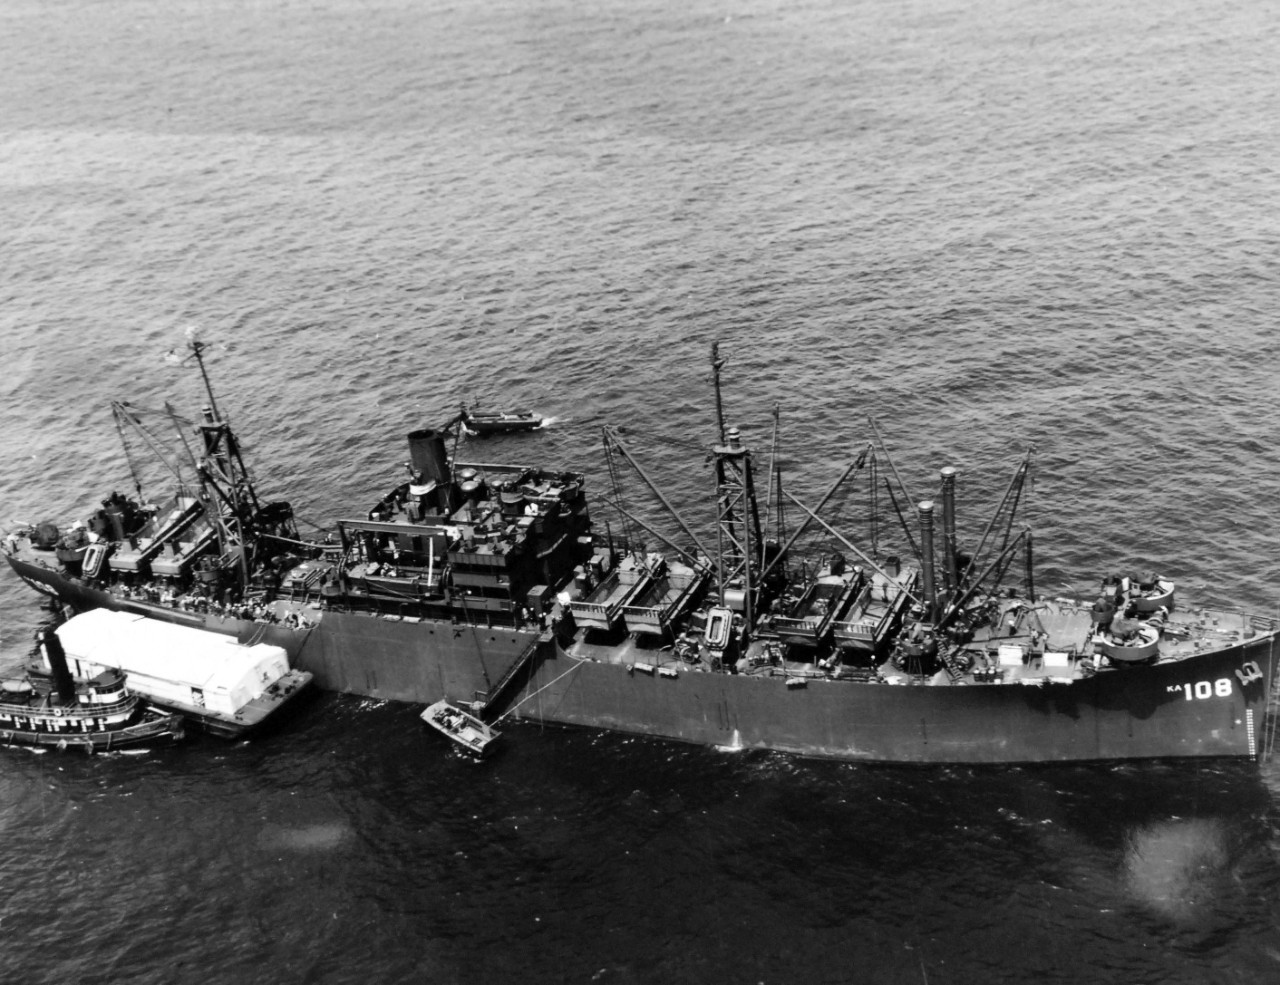 80-G-324143:  USS Washburn (AKA-108), May 1945.  Aerial at 300 feet.  Shown:  Broadside.   Photographed by Floyd Bennett Field aircraft, May 21, 1945.  Official U.S. Navy Photograph, now in the collections of the National Archives.  (2017/11/22).  Note, photograph is curved.   